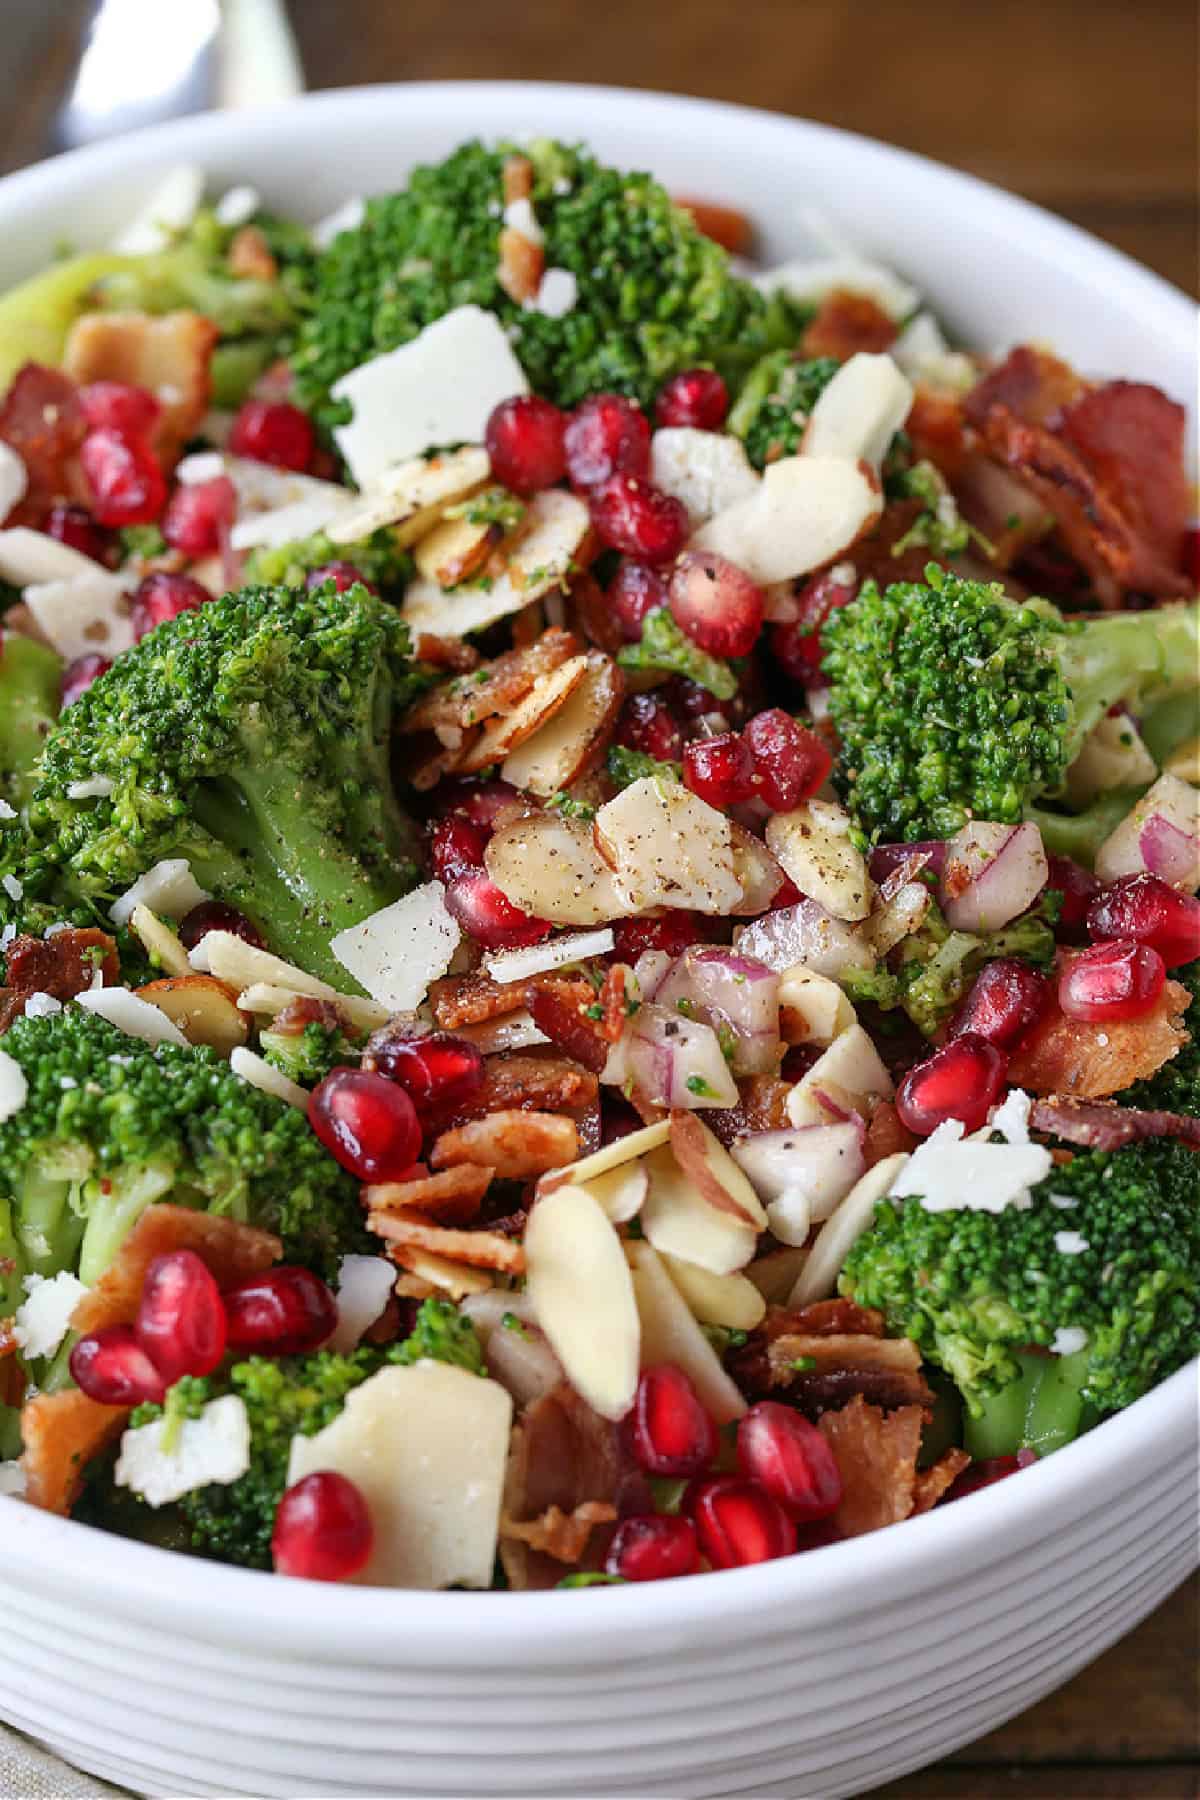 salad with broccoli, almonds and pomegranate seeds